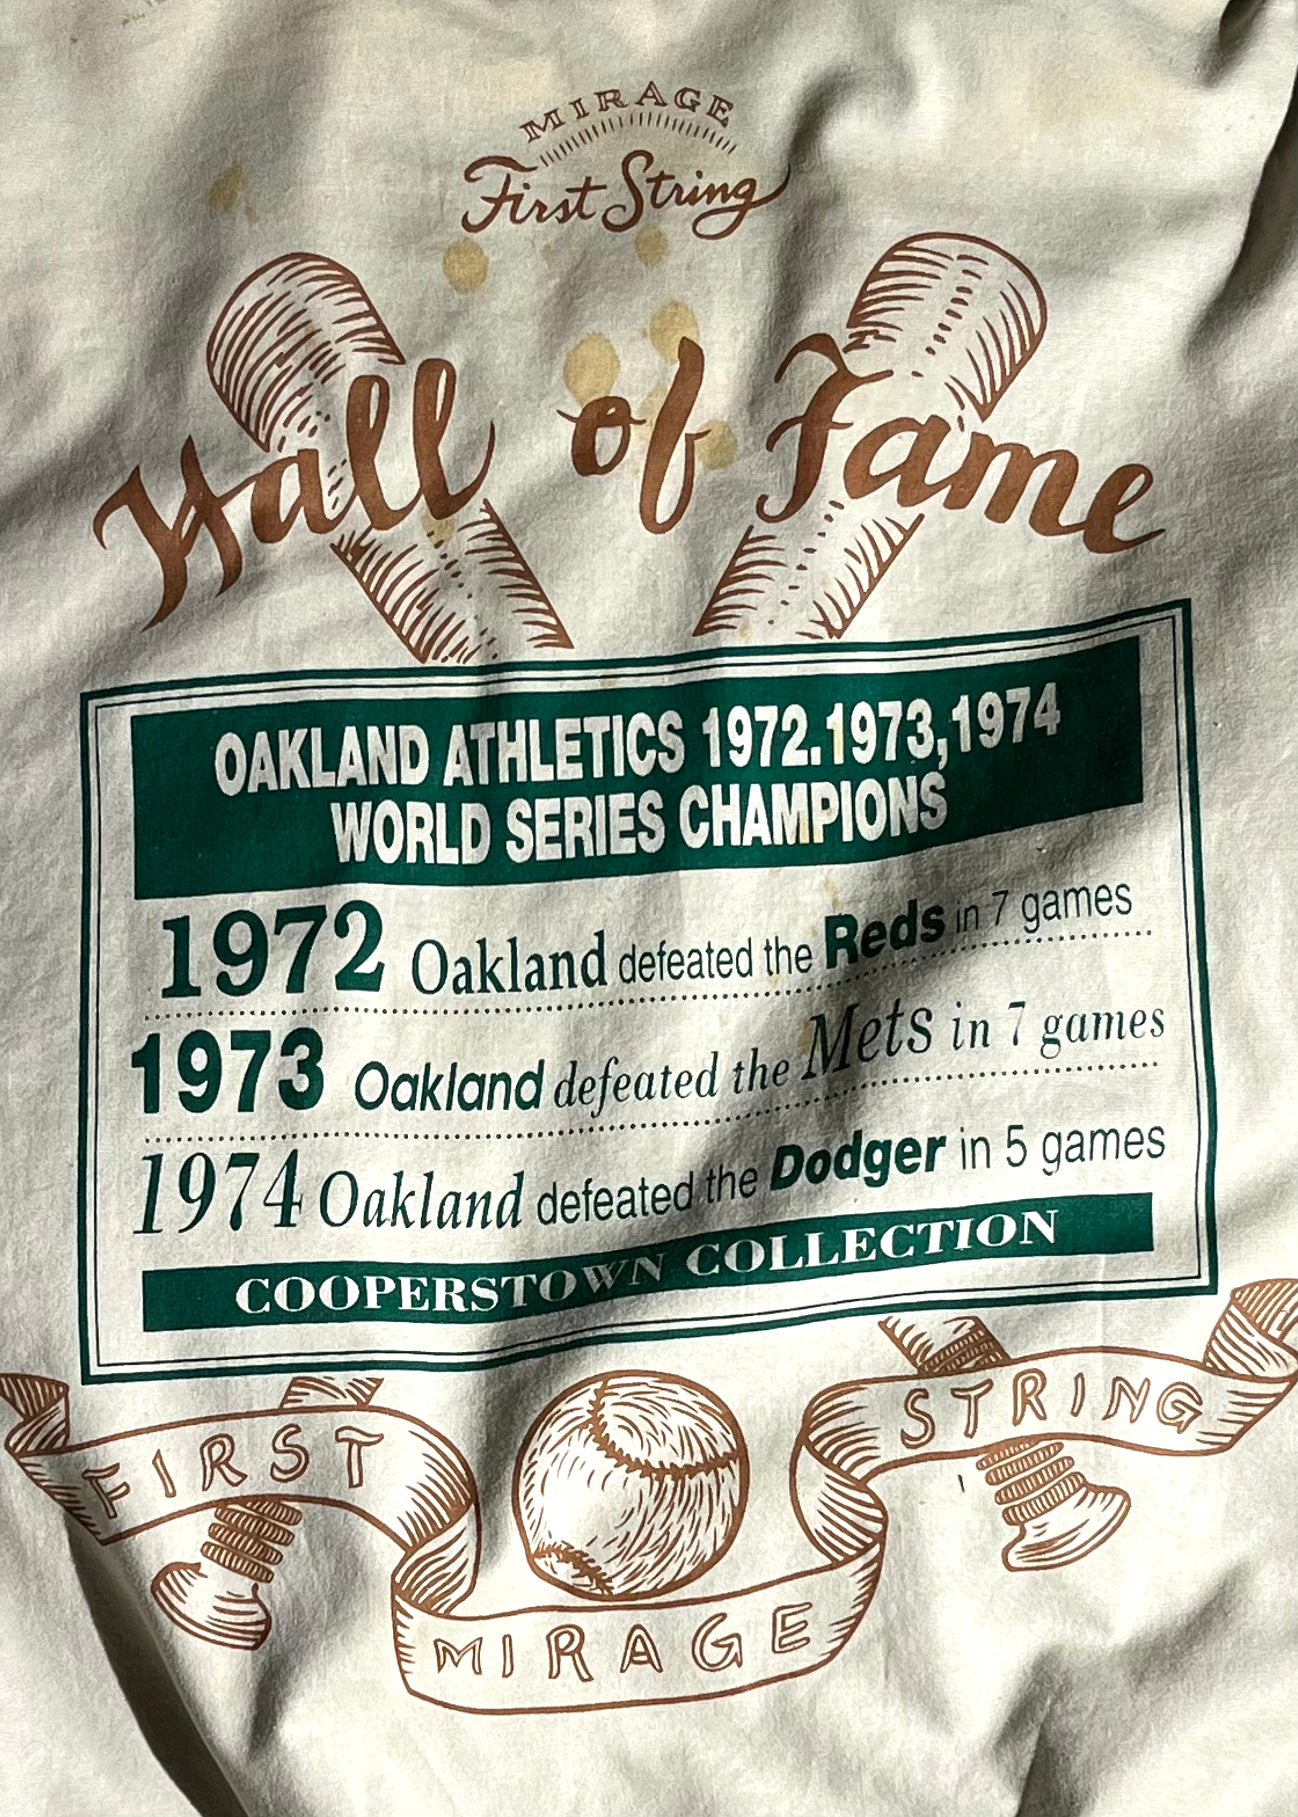 Oakland Athletics Gold Throwback Cooperstown Men's Jersey